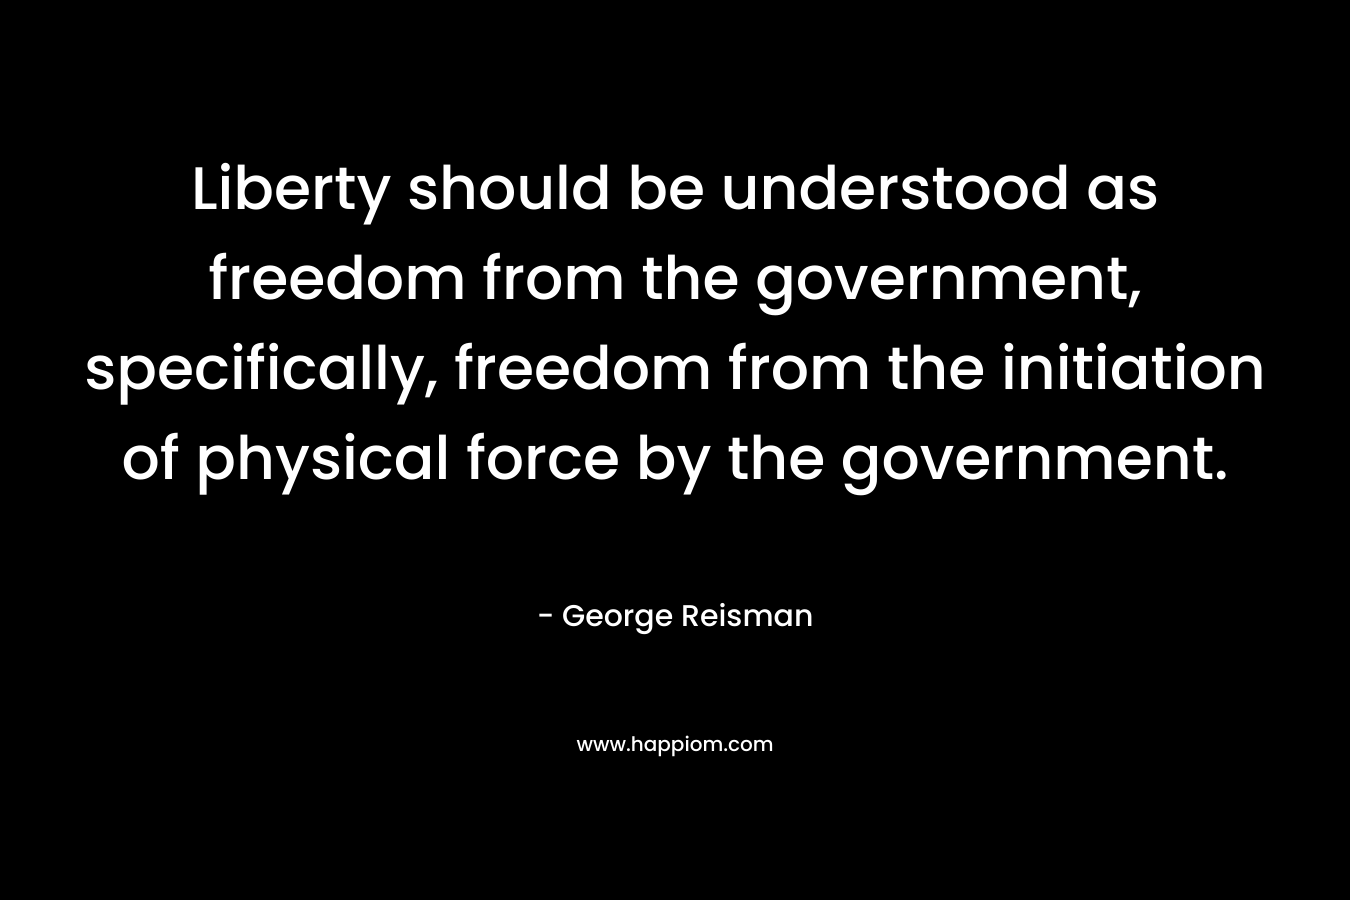 Liberty should be understood as freedom from the government, specifically, freedom from the initiation of physical force by the government.